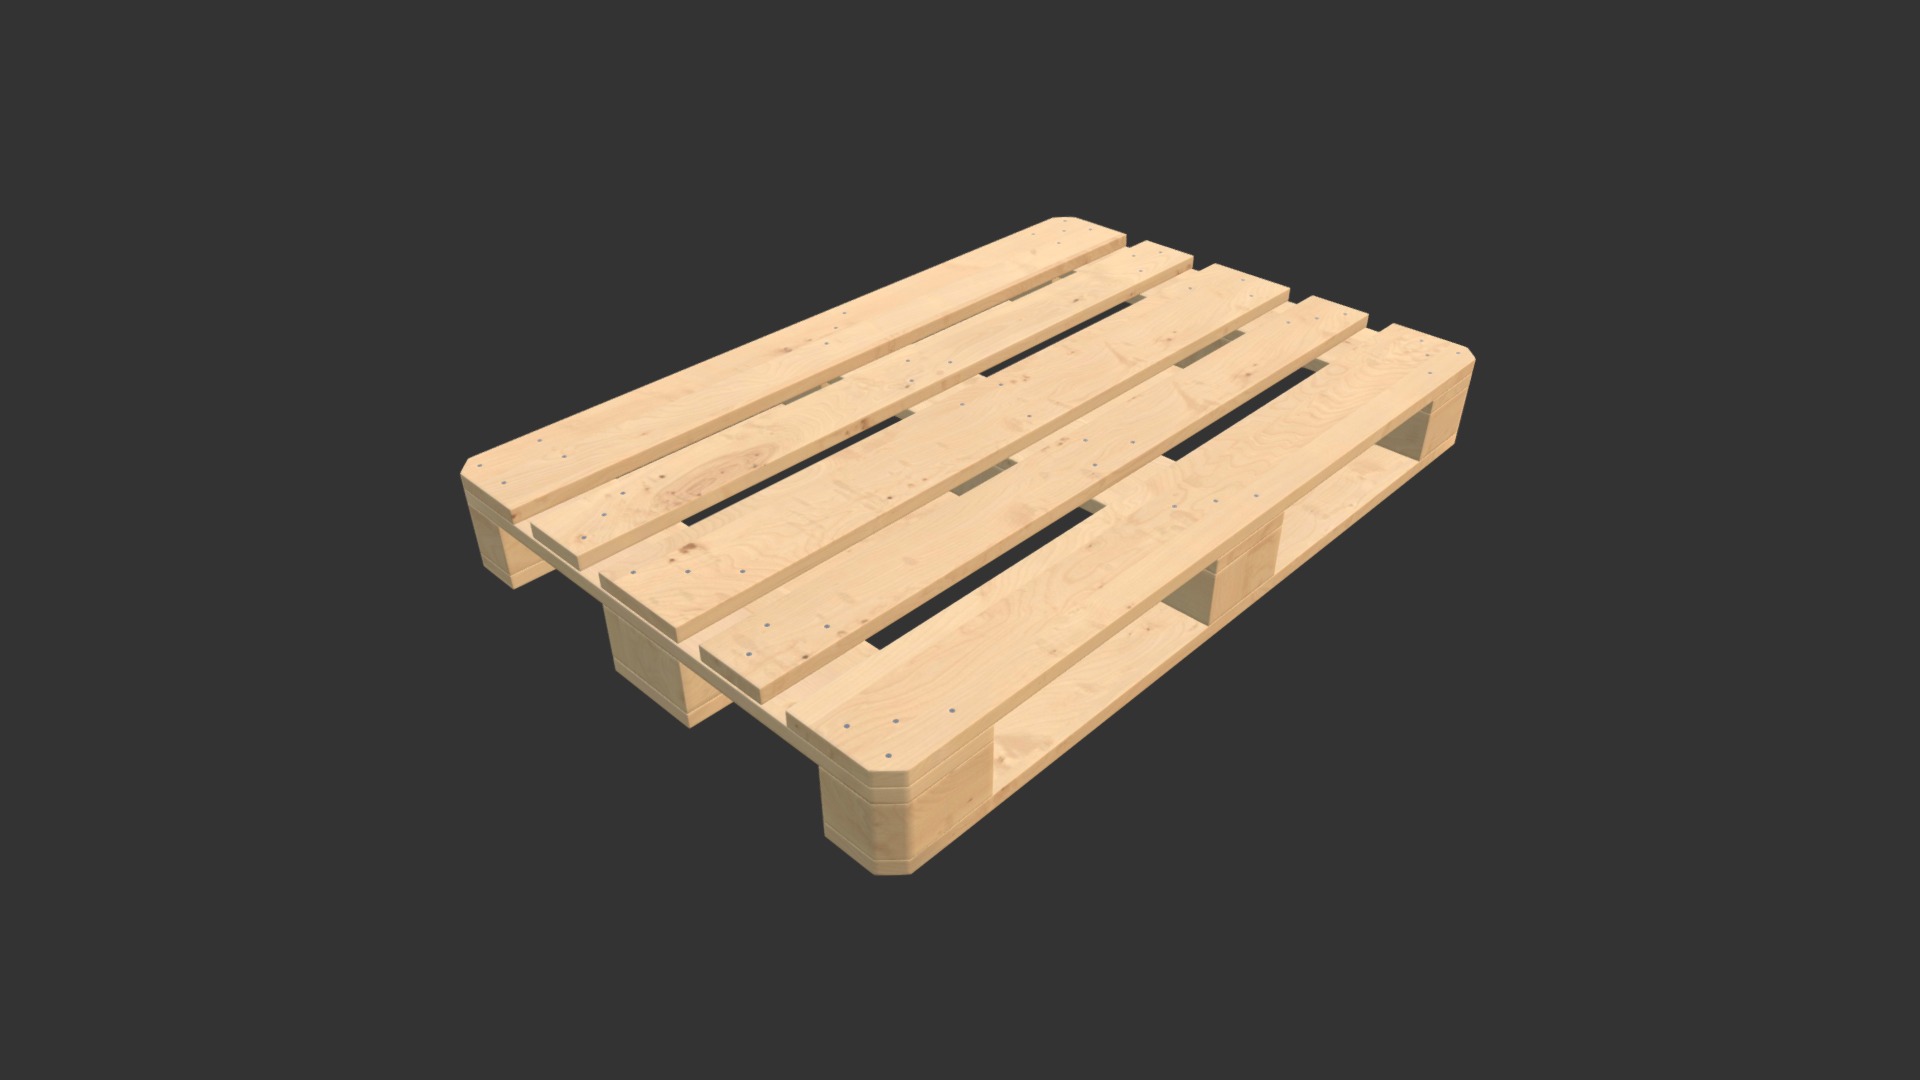 3D model Wooden euro pallet - This is a 3D model of the Wooden euro pallet. The 3D model is about a wooden box with a black background.